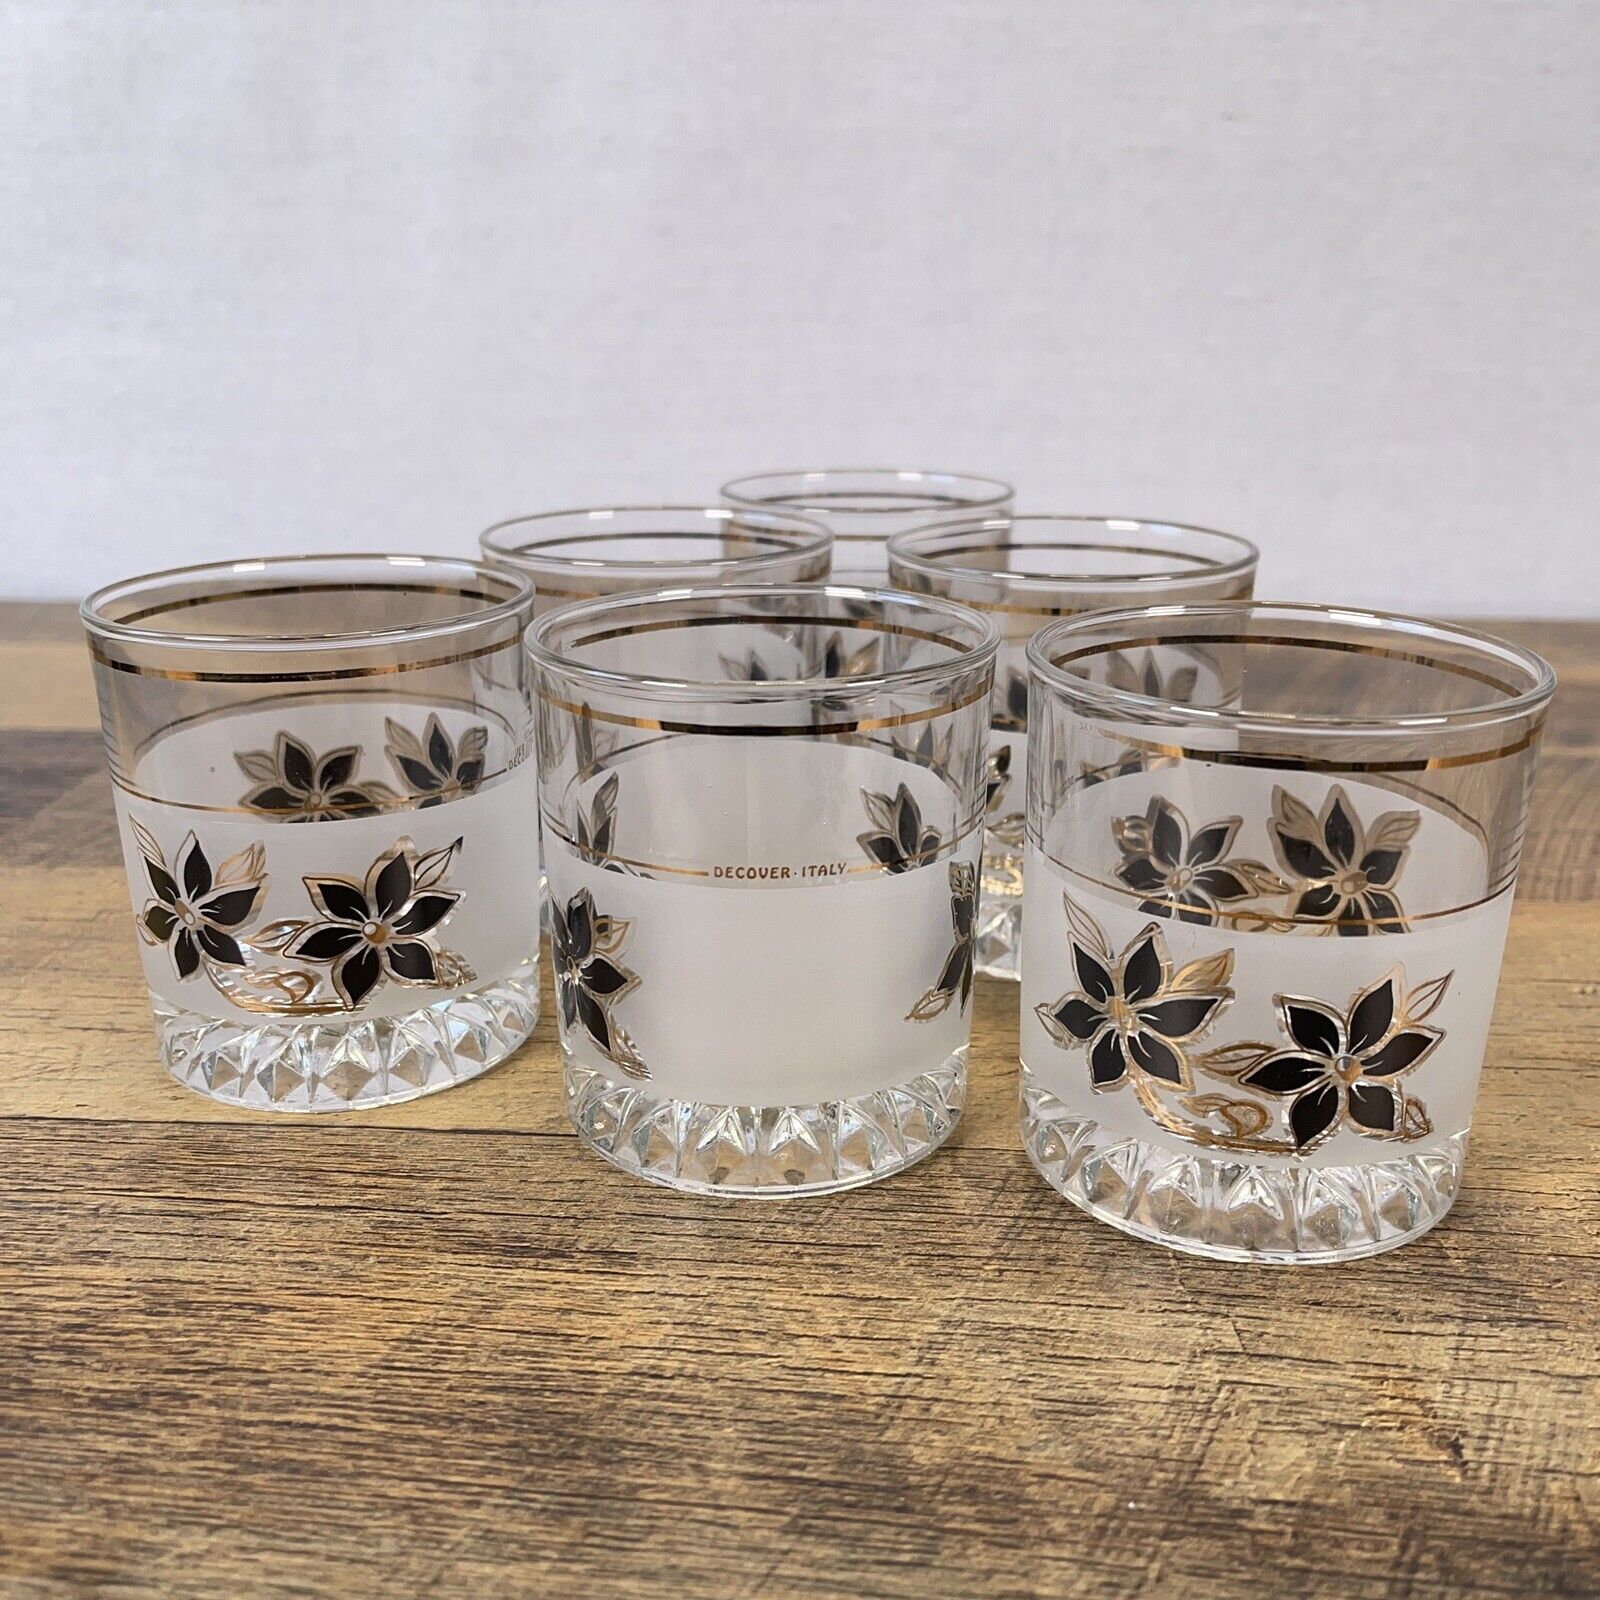 6 Vintage Decover Italy Black Floral Flower Frosted Low Ball Drink Glasses